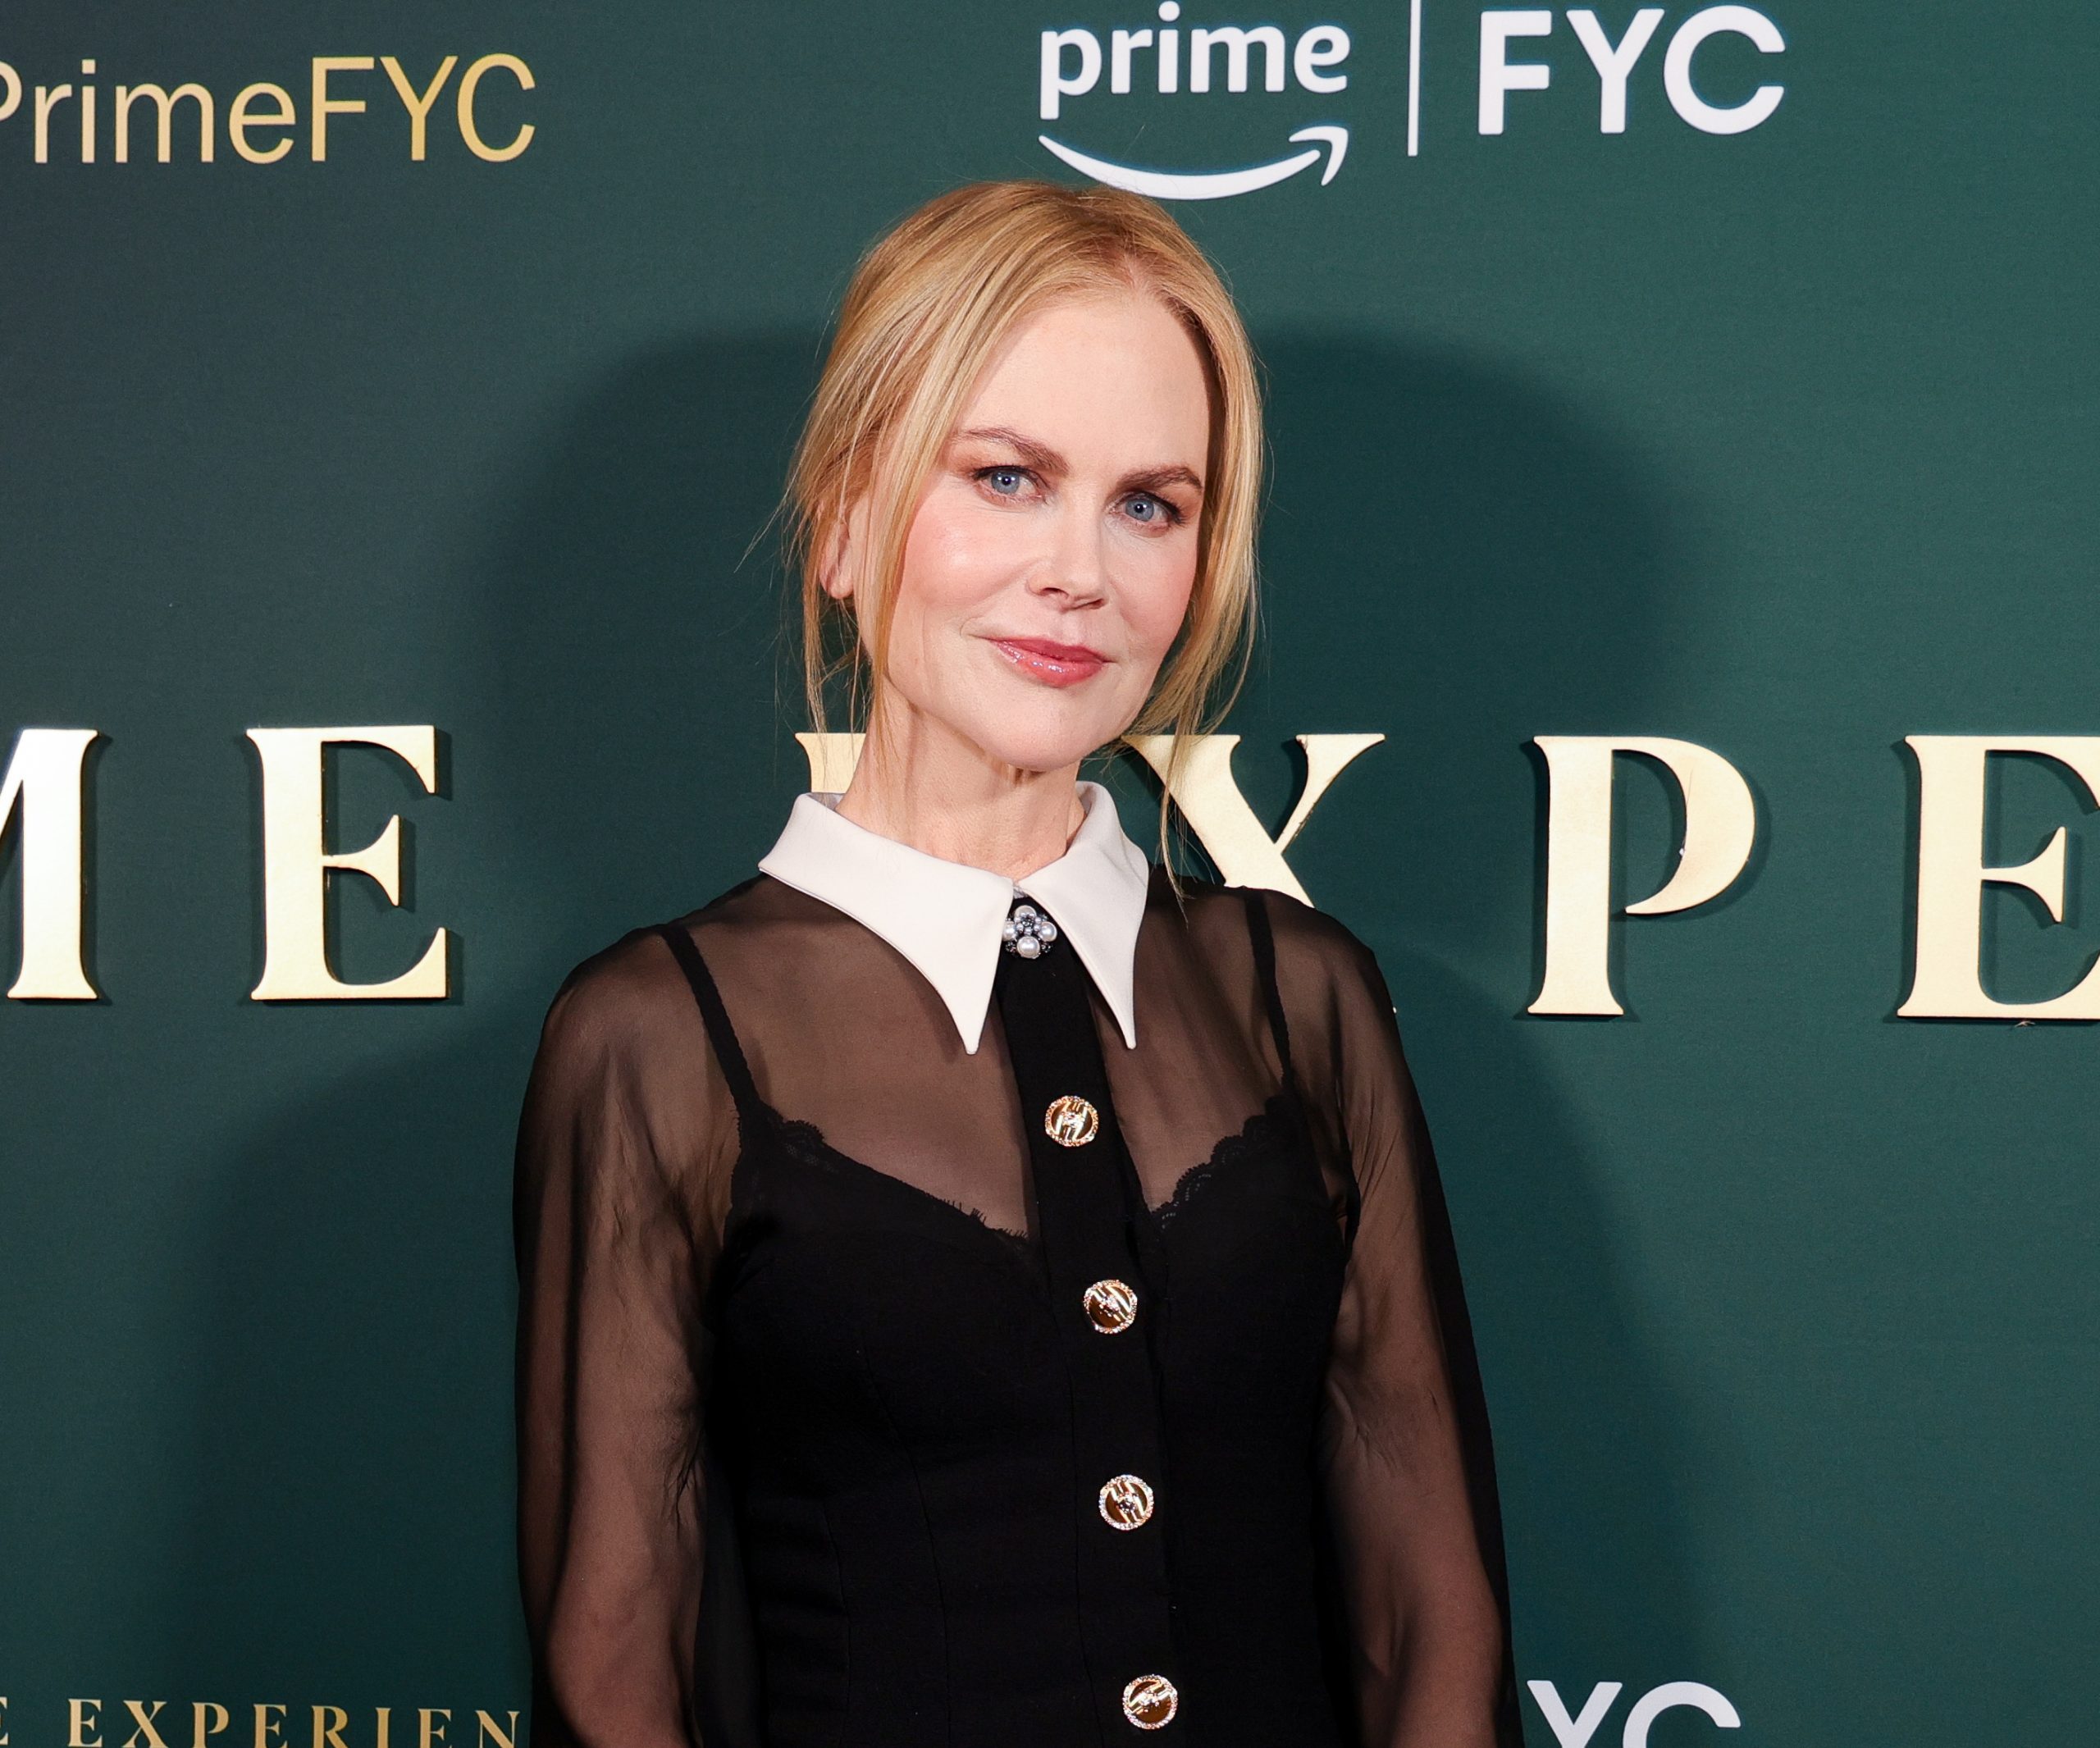 Nicole Kidman’s Classically Chic Versace Look Steals the Show at ‘Expats’ FYC Panel